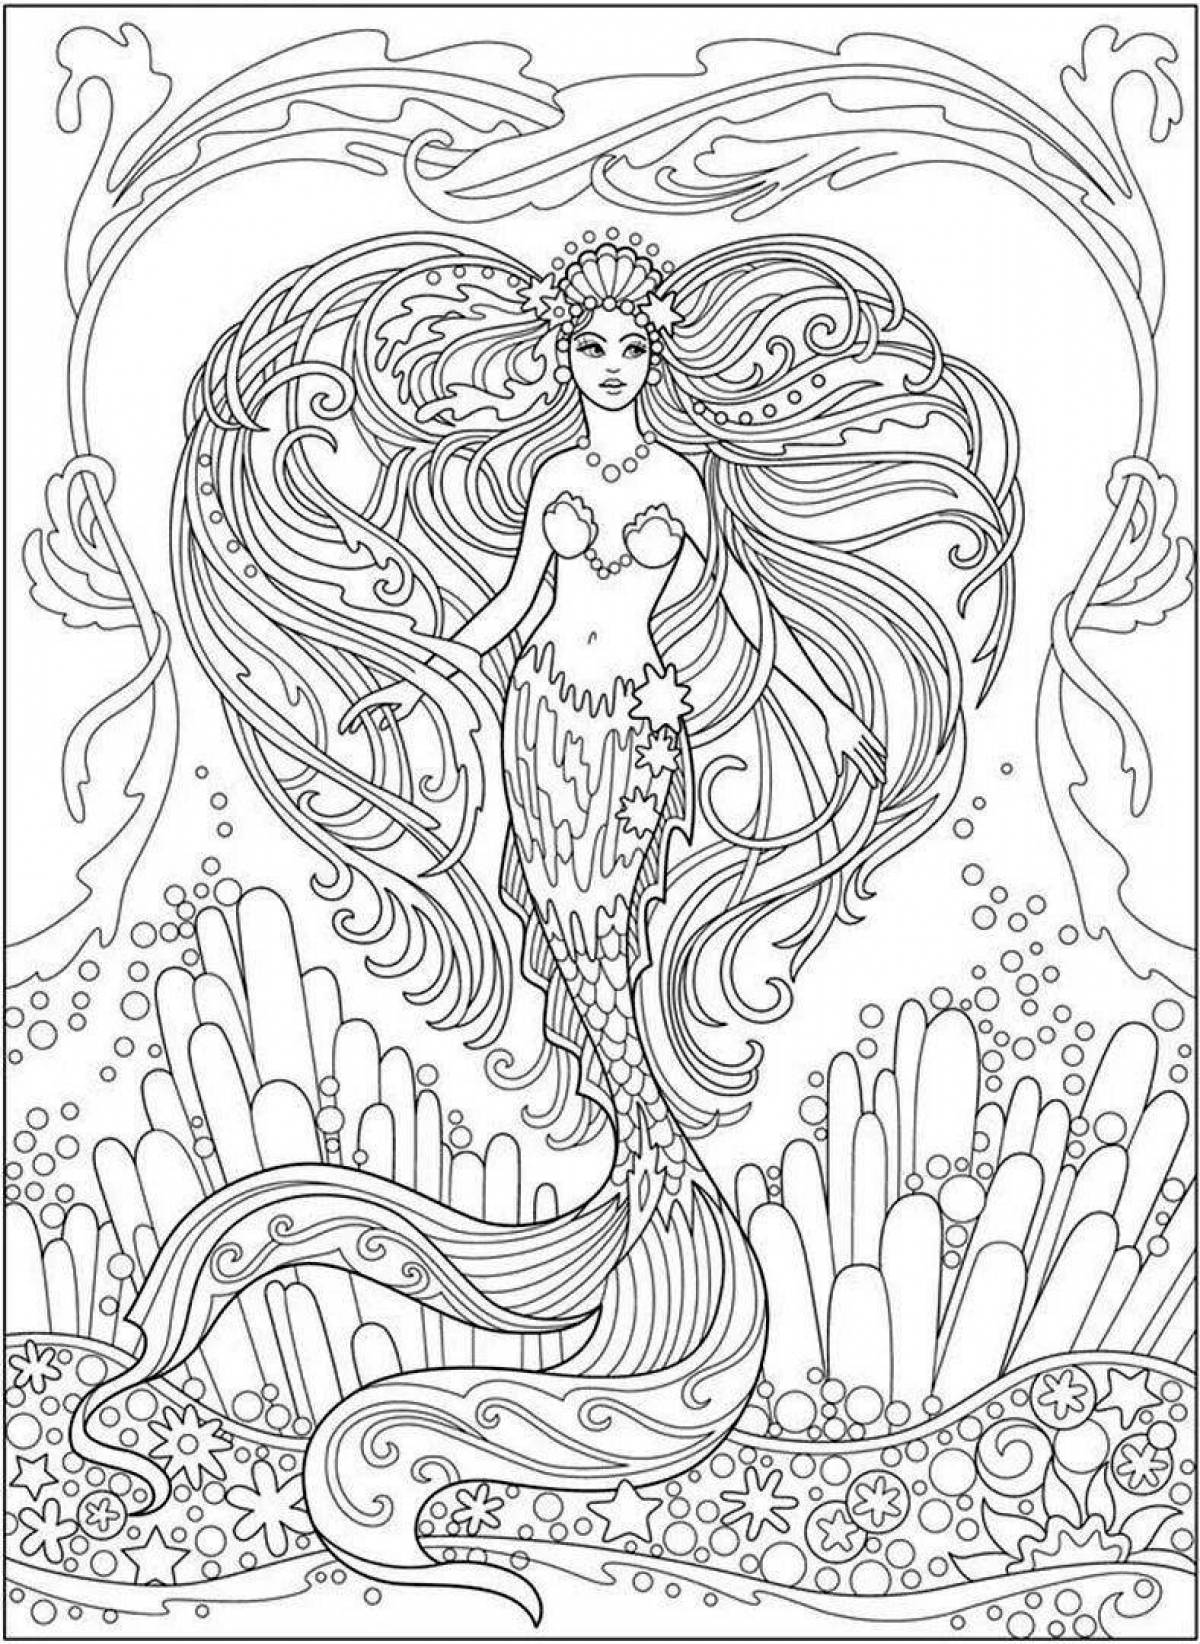 Coloring page charming mermaid queen